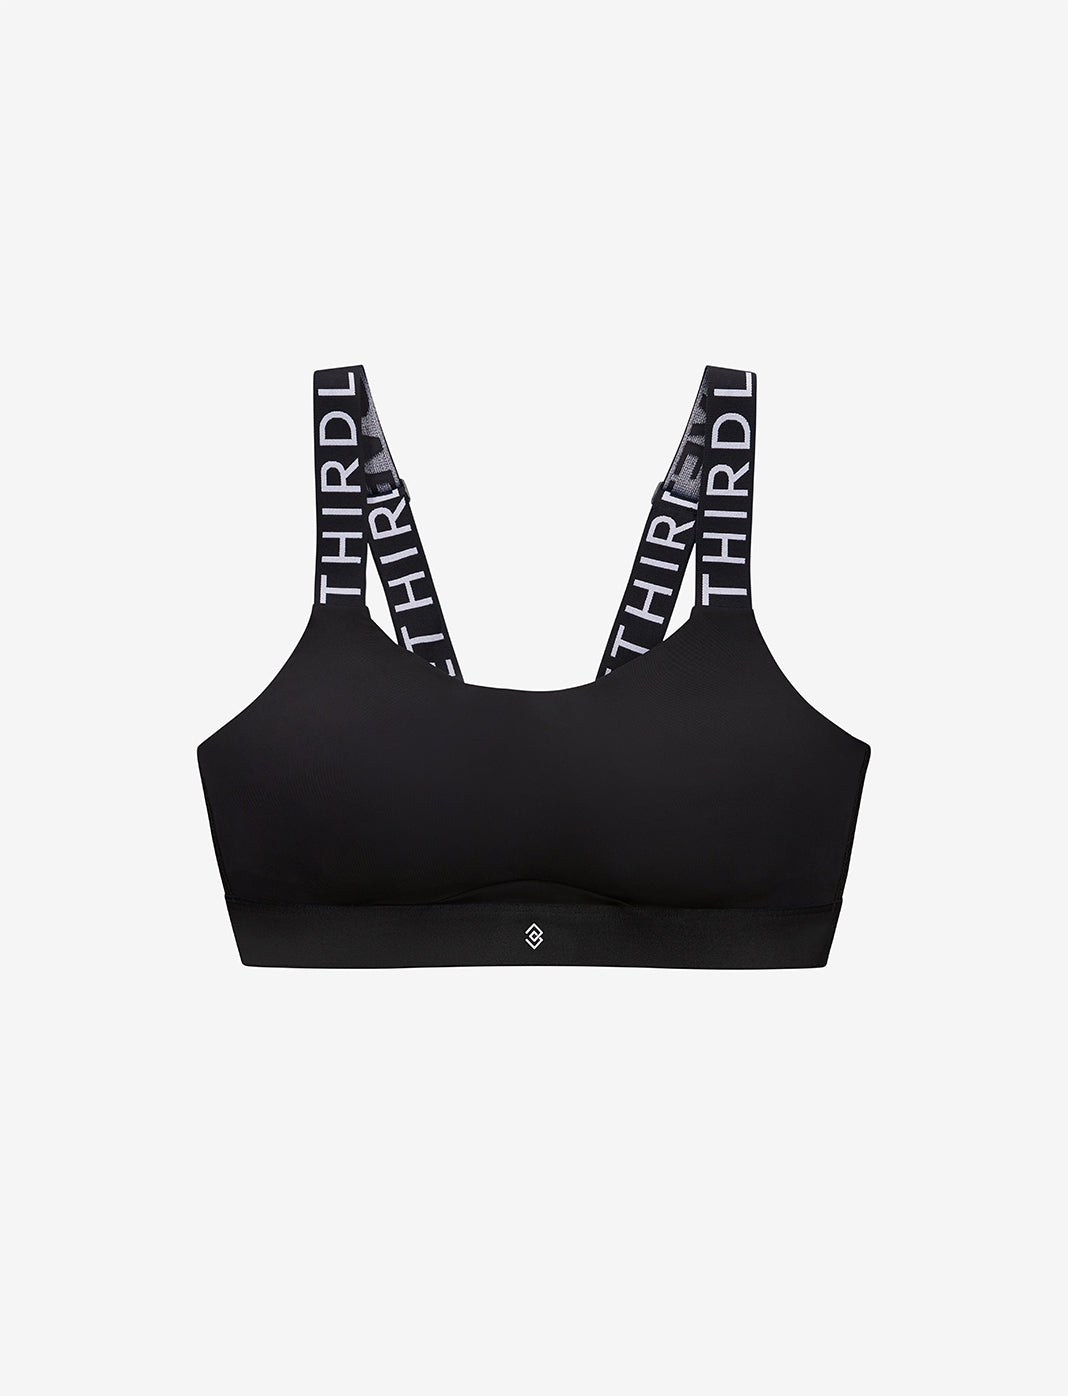 Winner of 'Best Sports Bra' - 8 TIMES!! 🏆 I used to test the performa